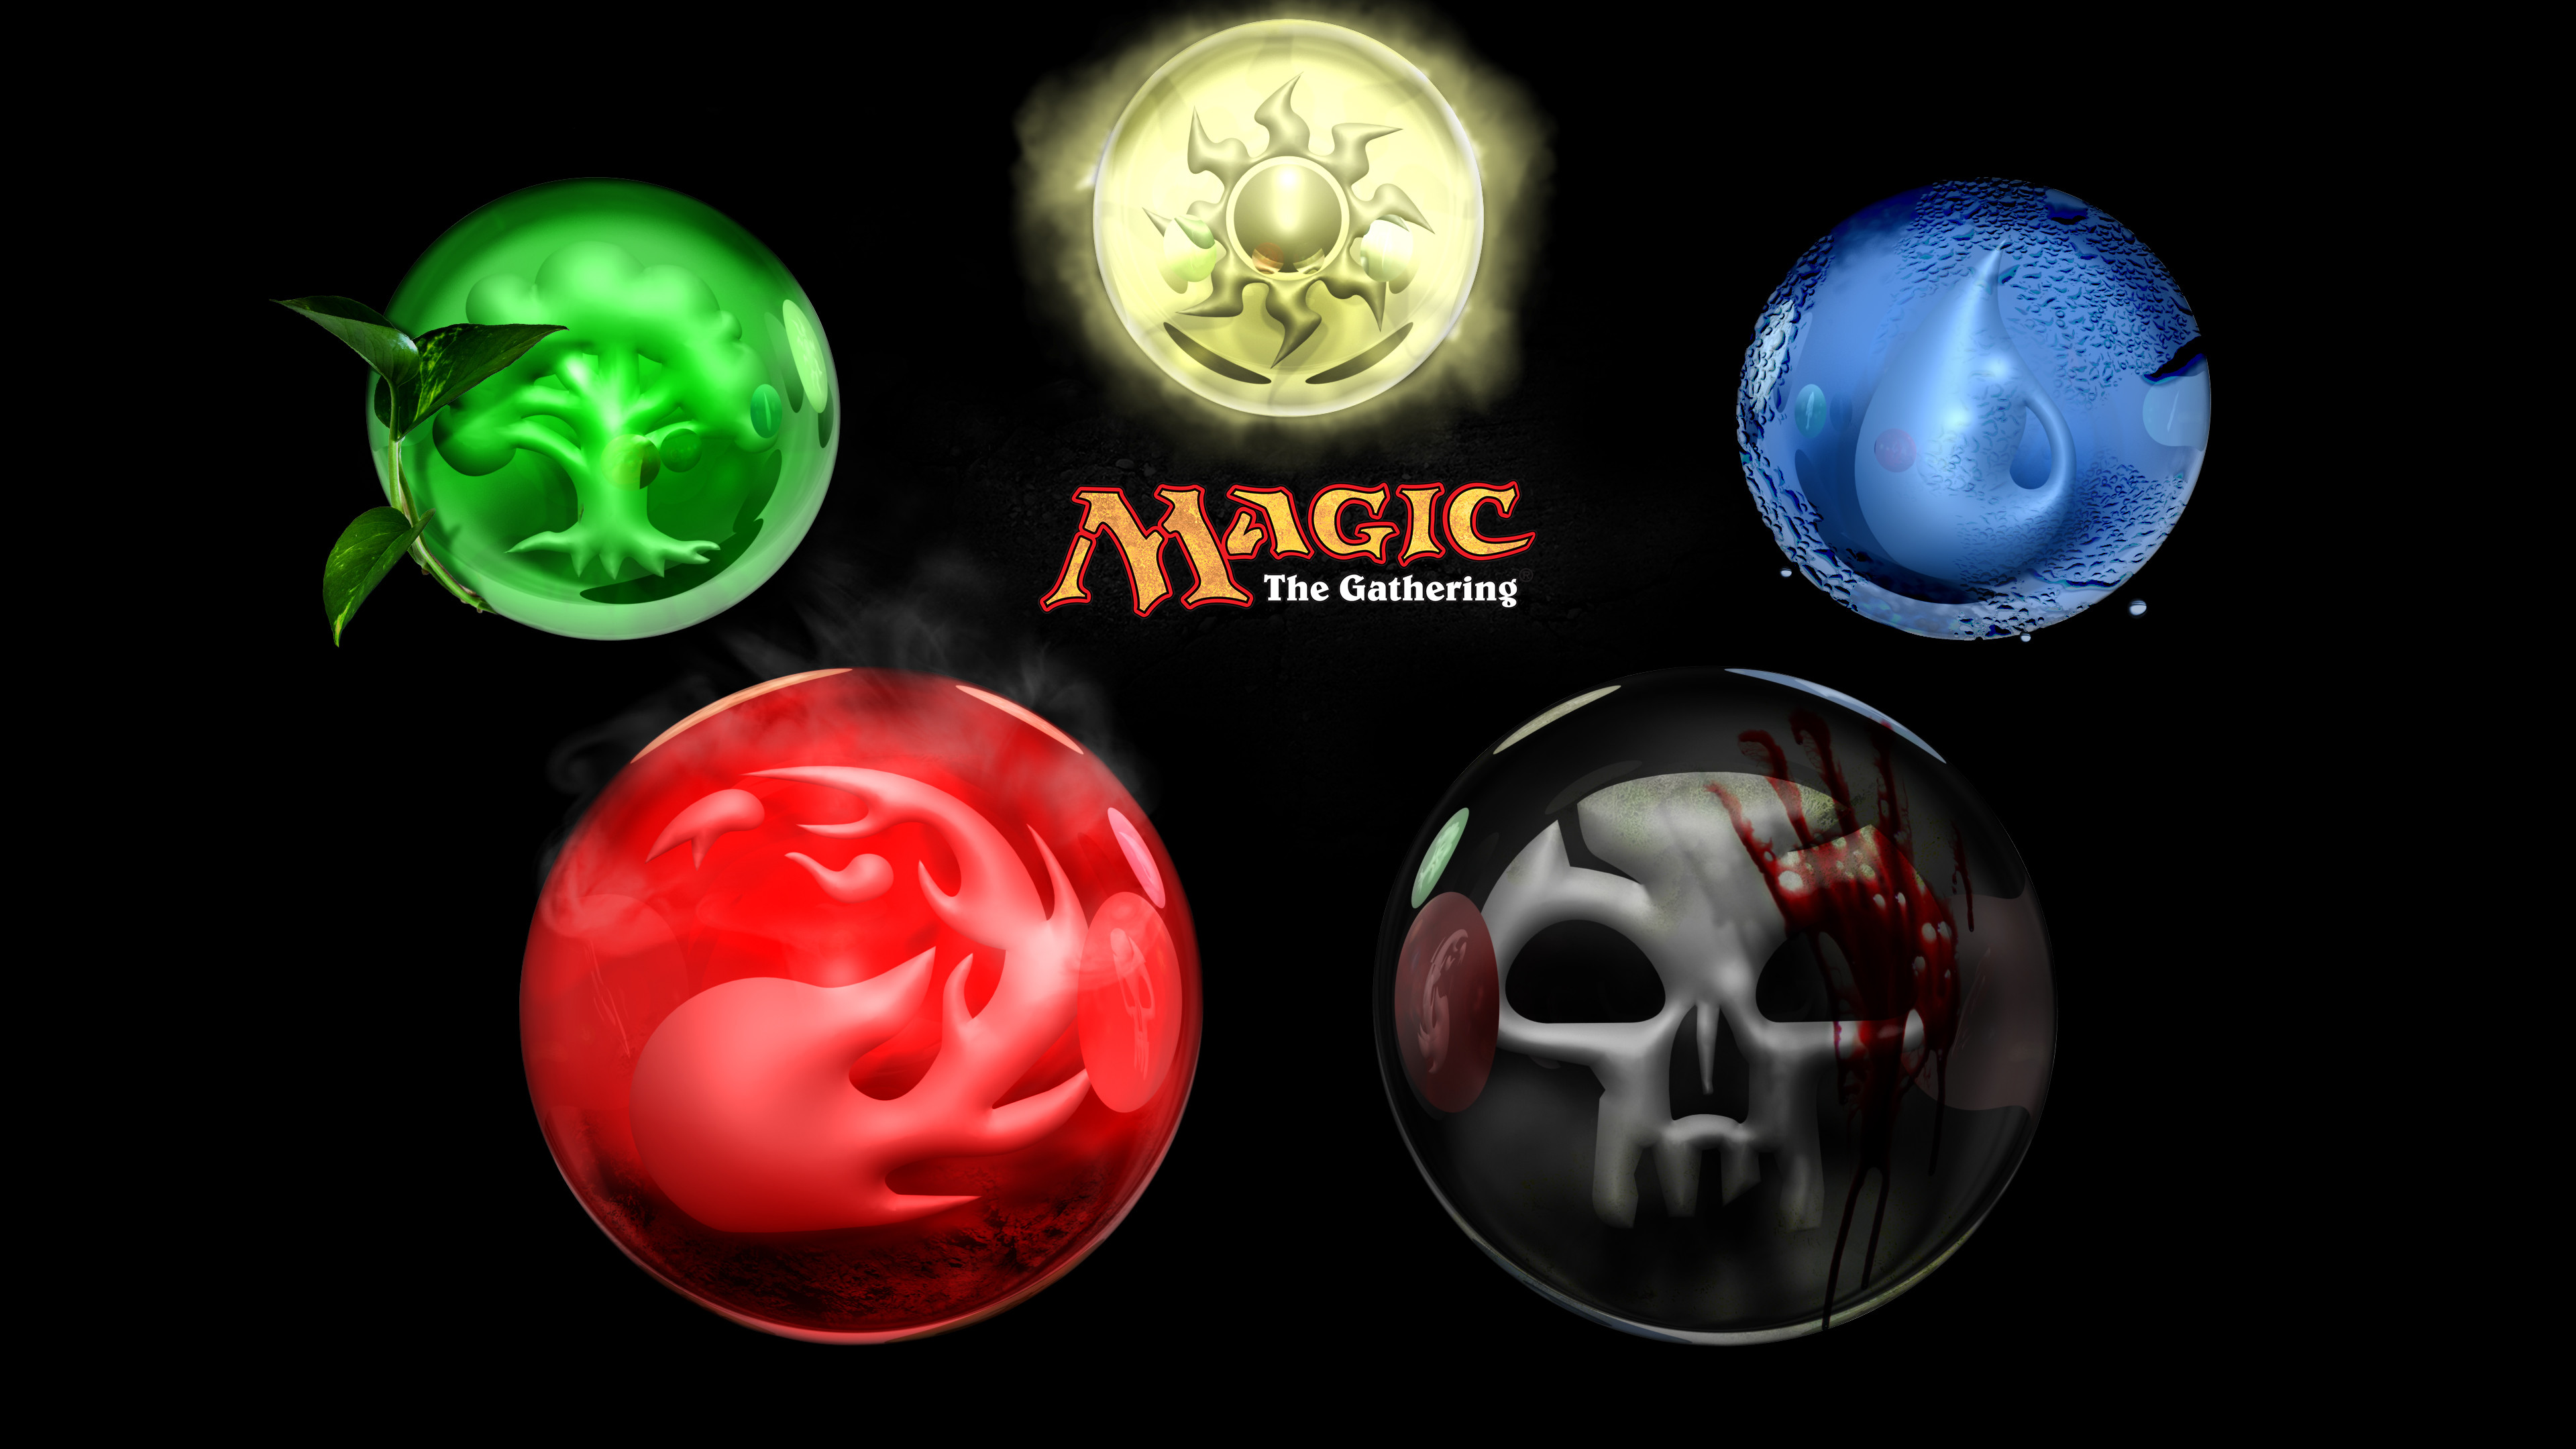 3840x2160 Game - Magic: The Gathering Colors 3D Element Game Marble Ball Wallpaper